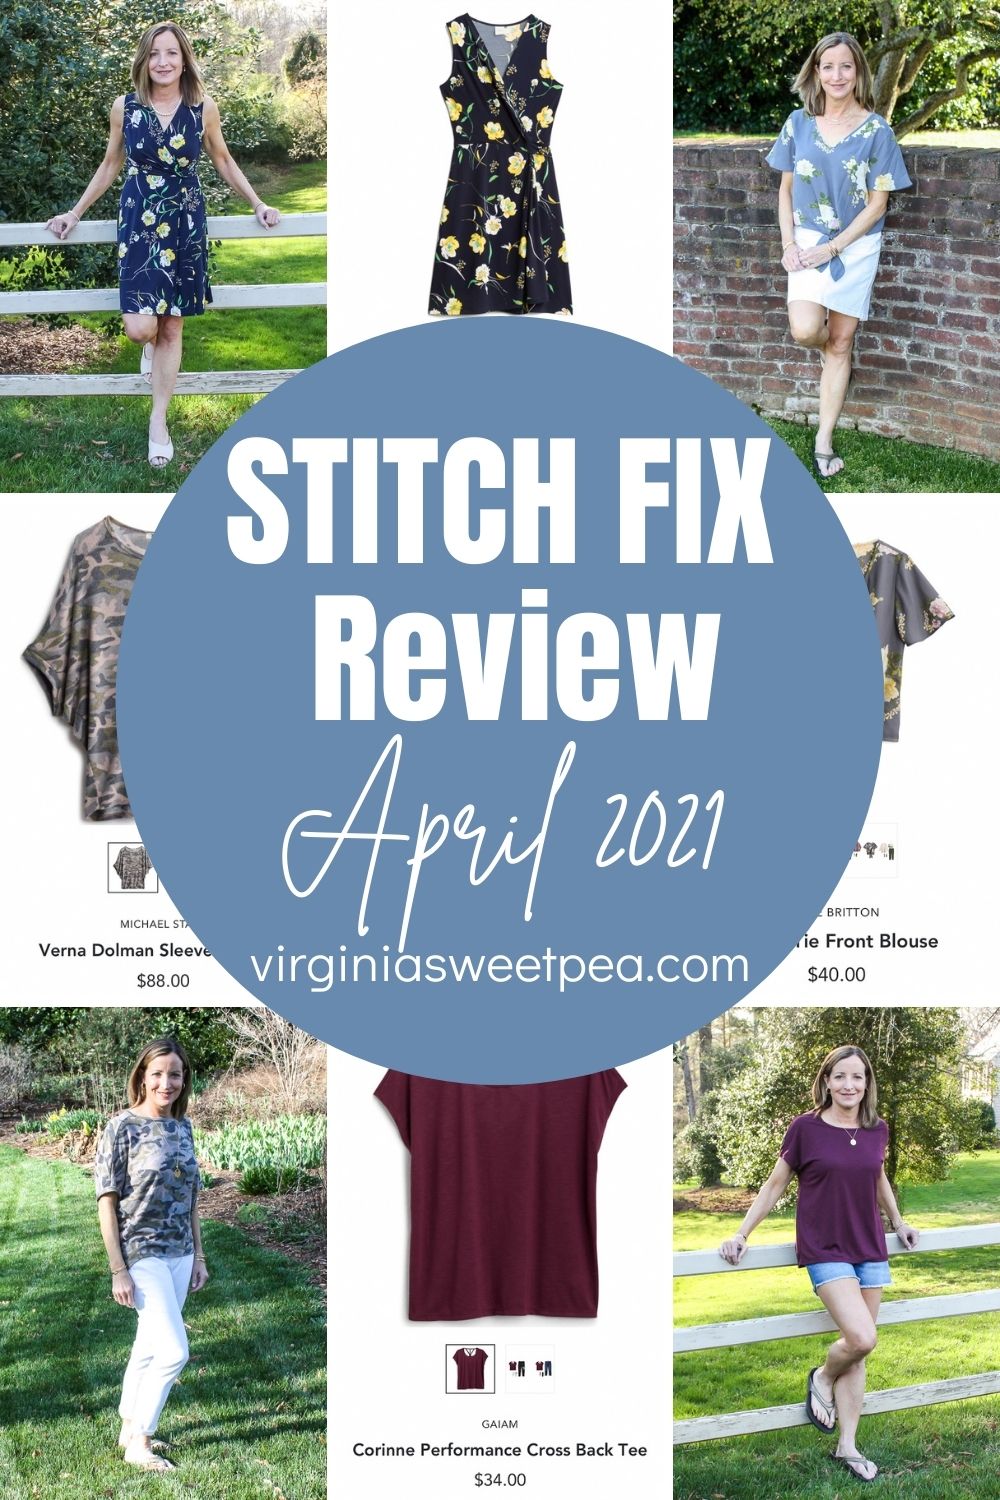 https://www.virginiasweetpea.com/wp-content/uploads/2021/04/Stitch-Fix-Review-for-April-2021.jpg